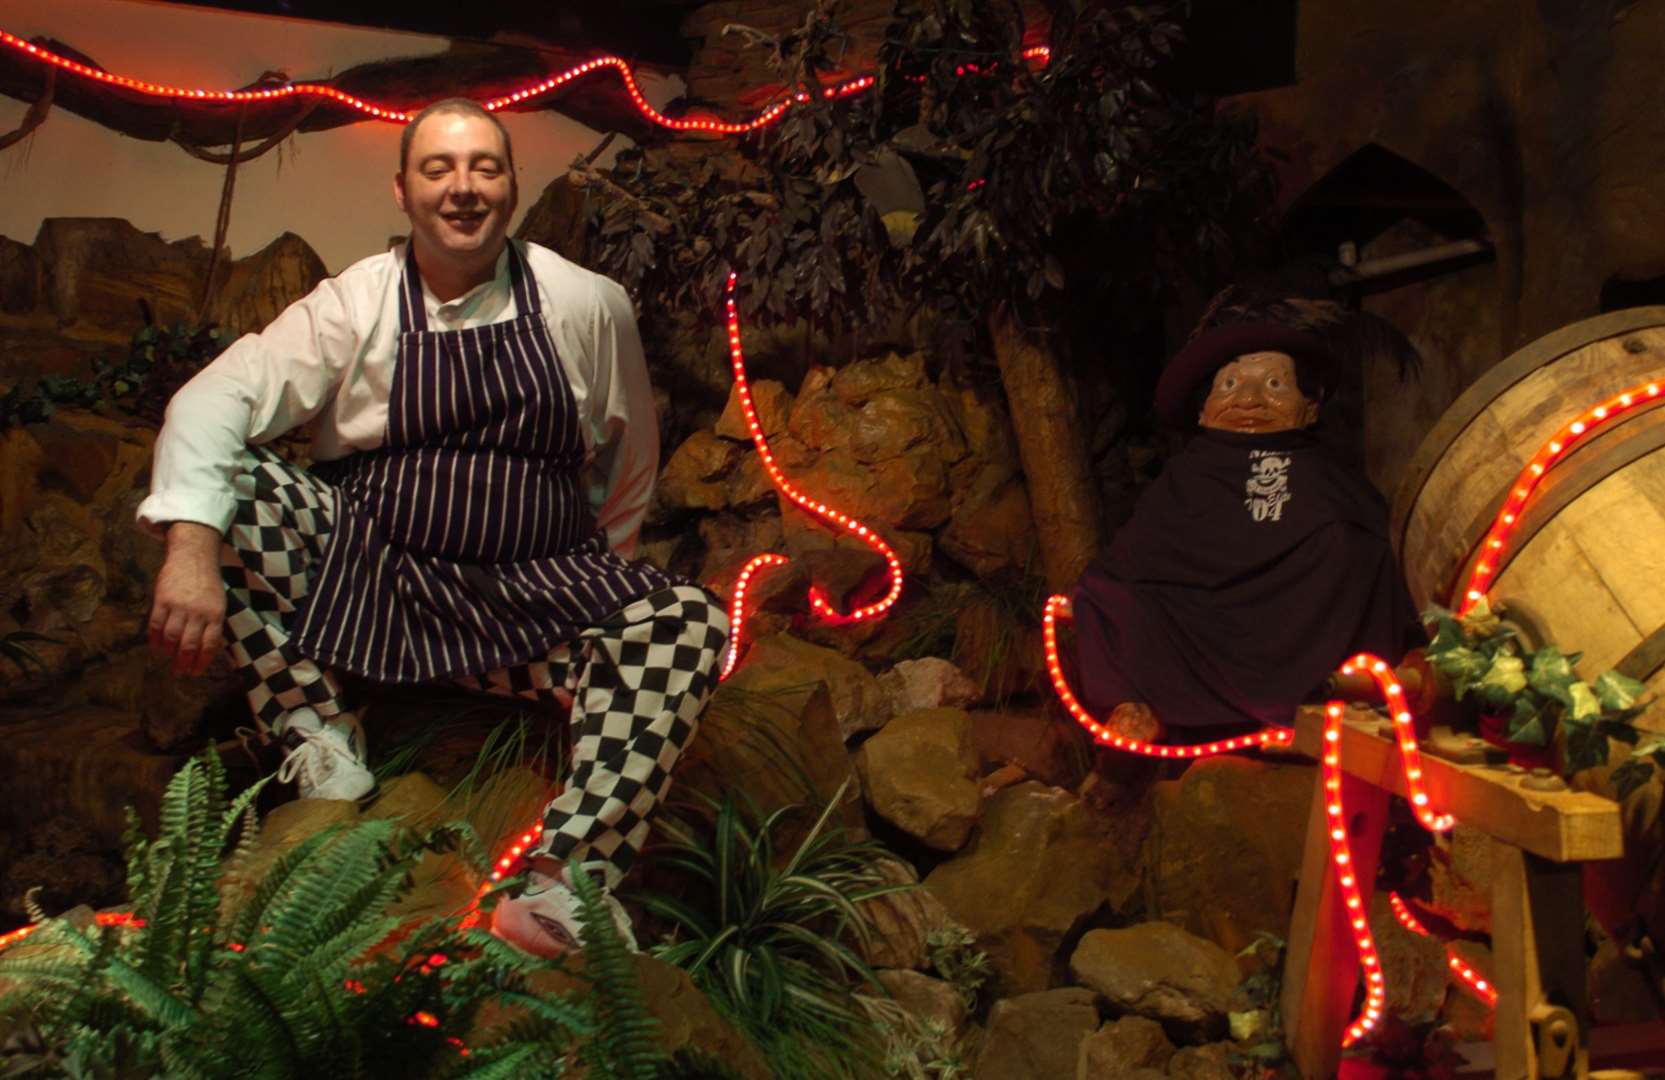 Dave Bottomley, a former chef of Brandybucks, Cliftonville, next to one of the Hobbit characters